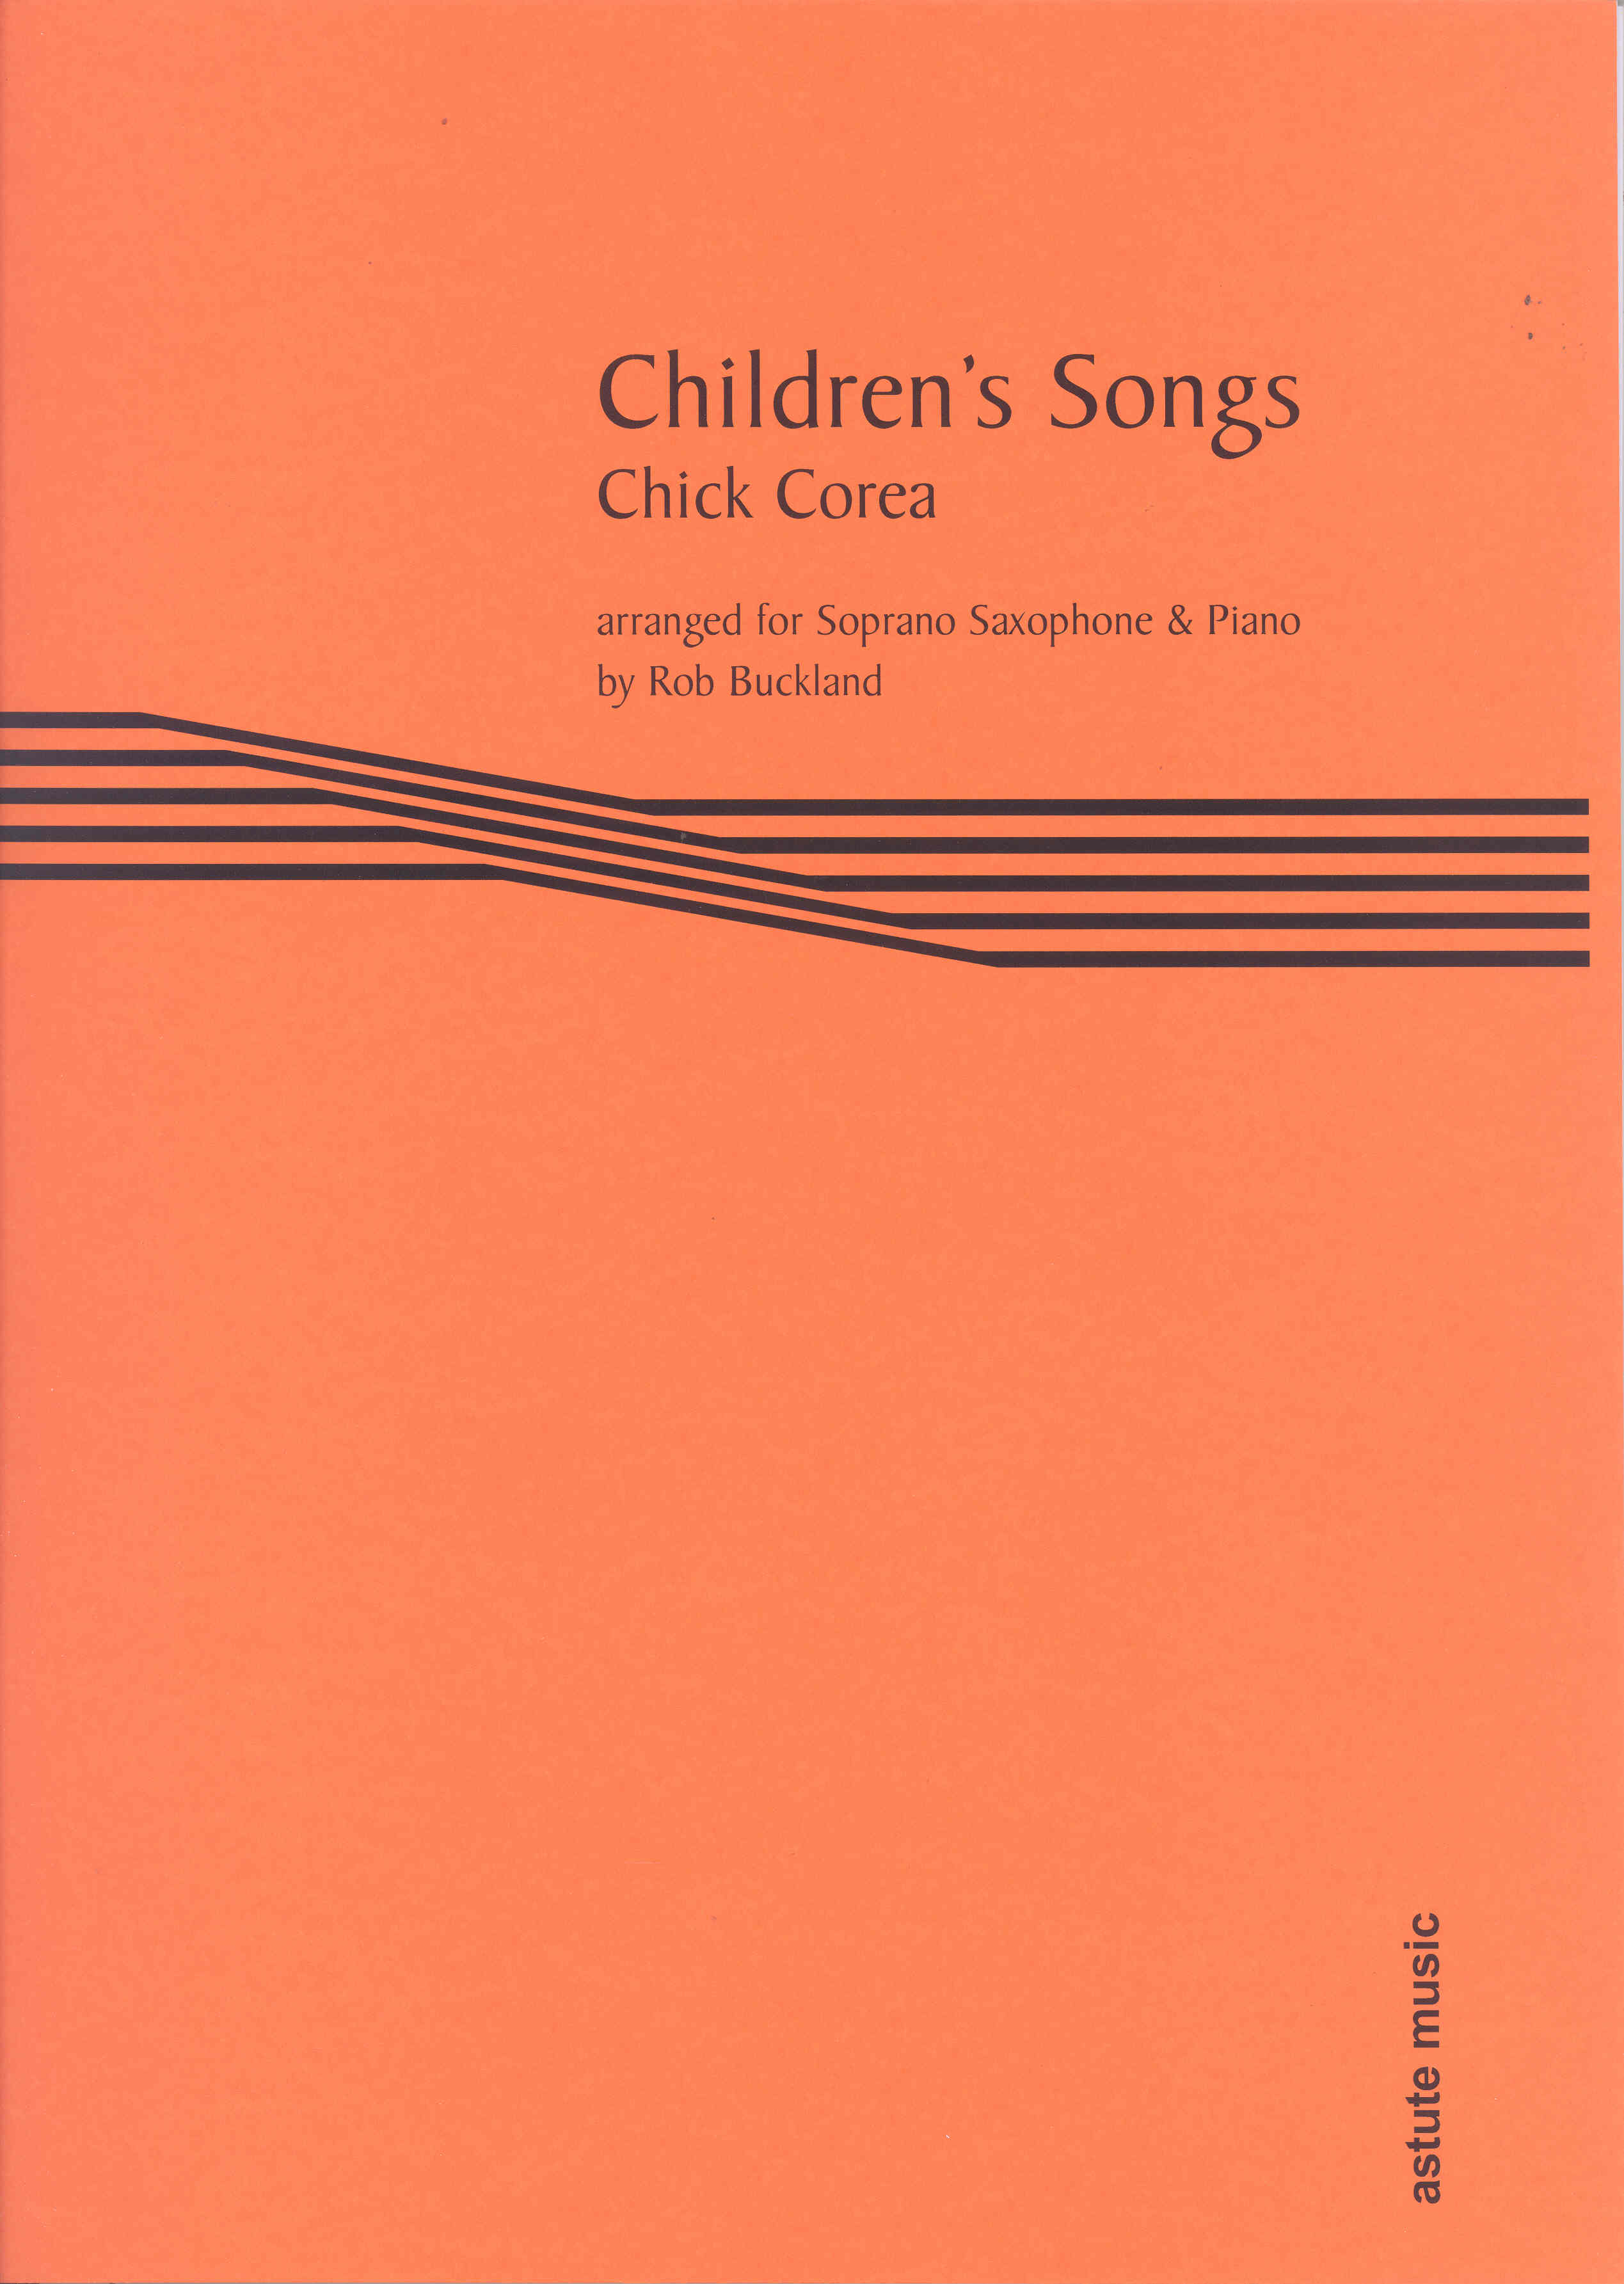 Chick Corea Childrens Songs Buckland Sax & Piano Sheet Music Songbook